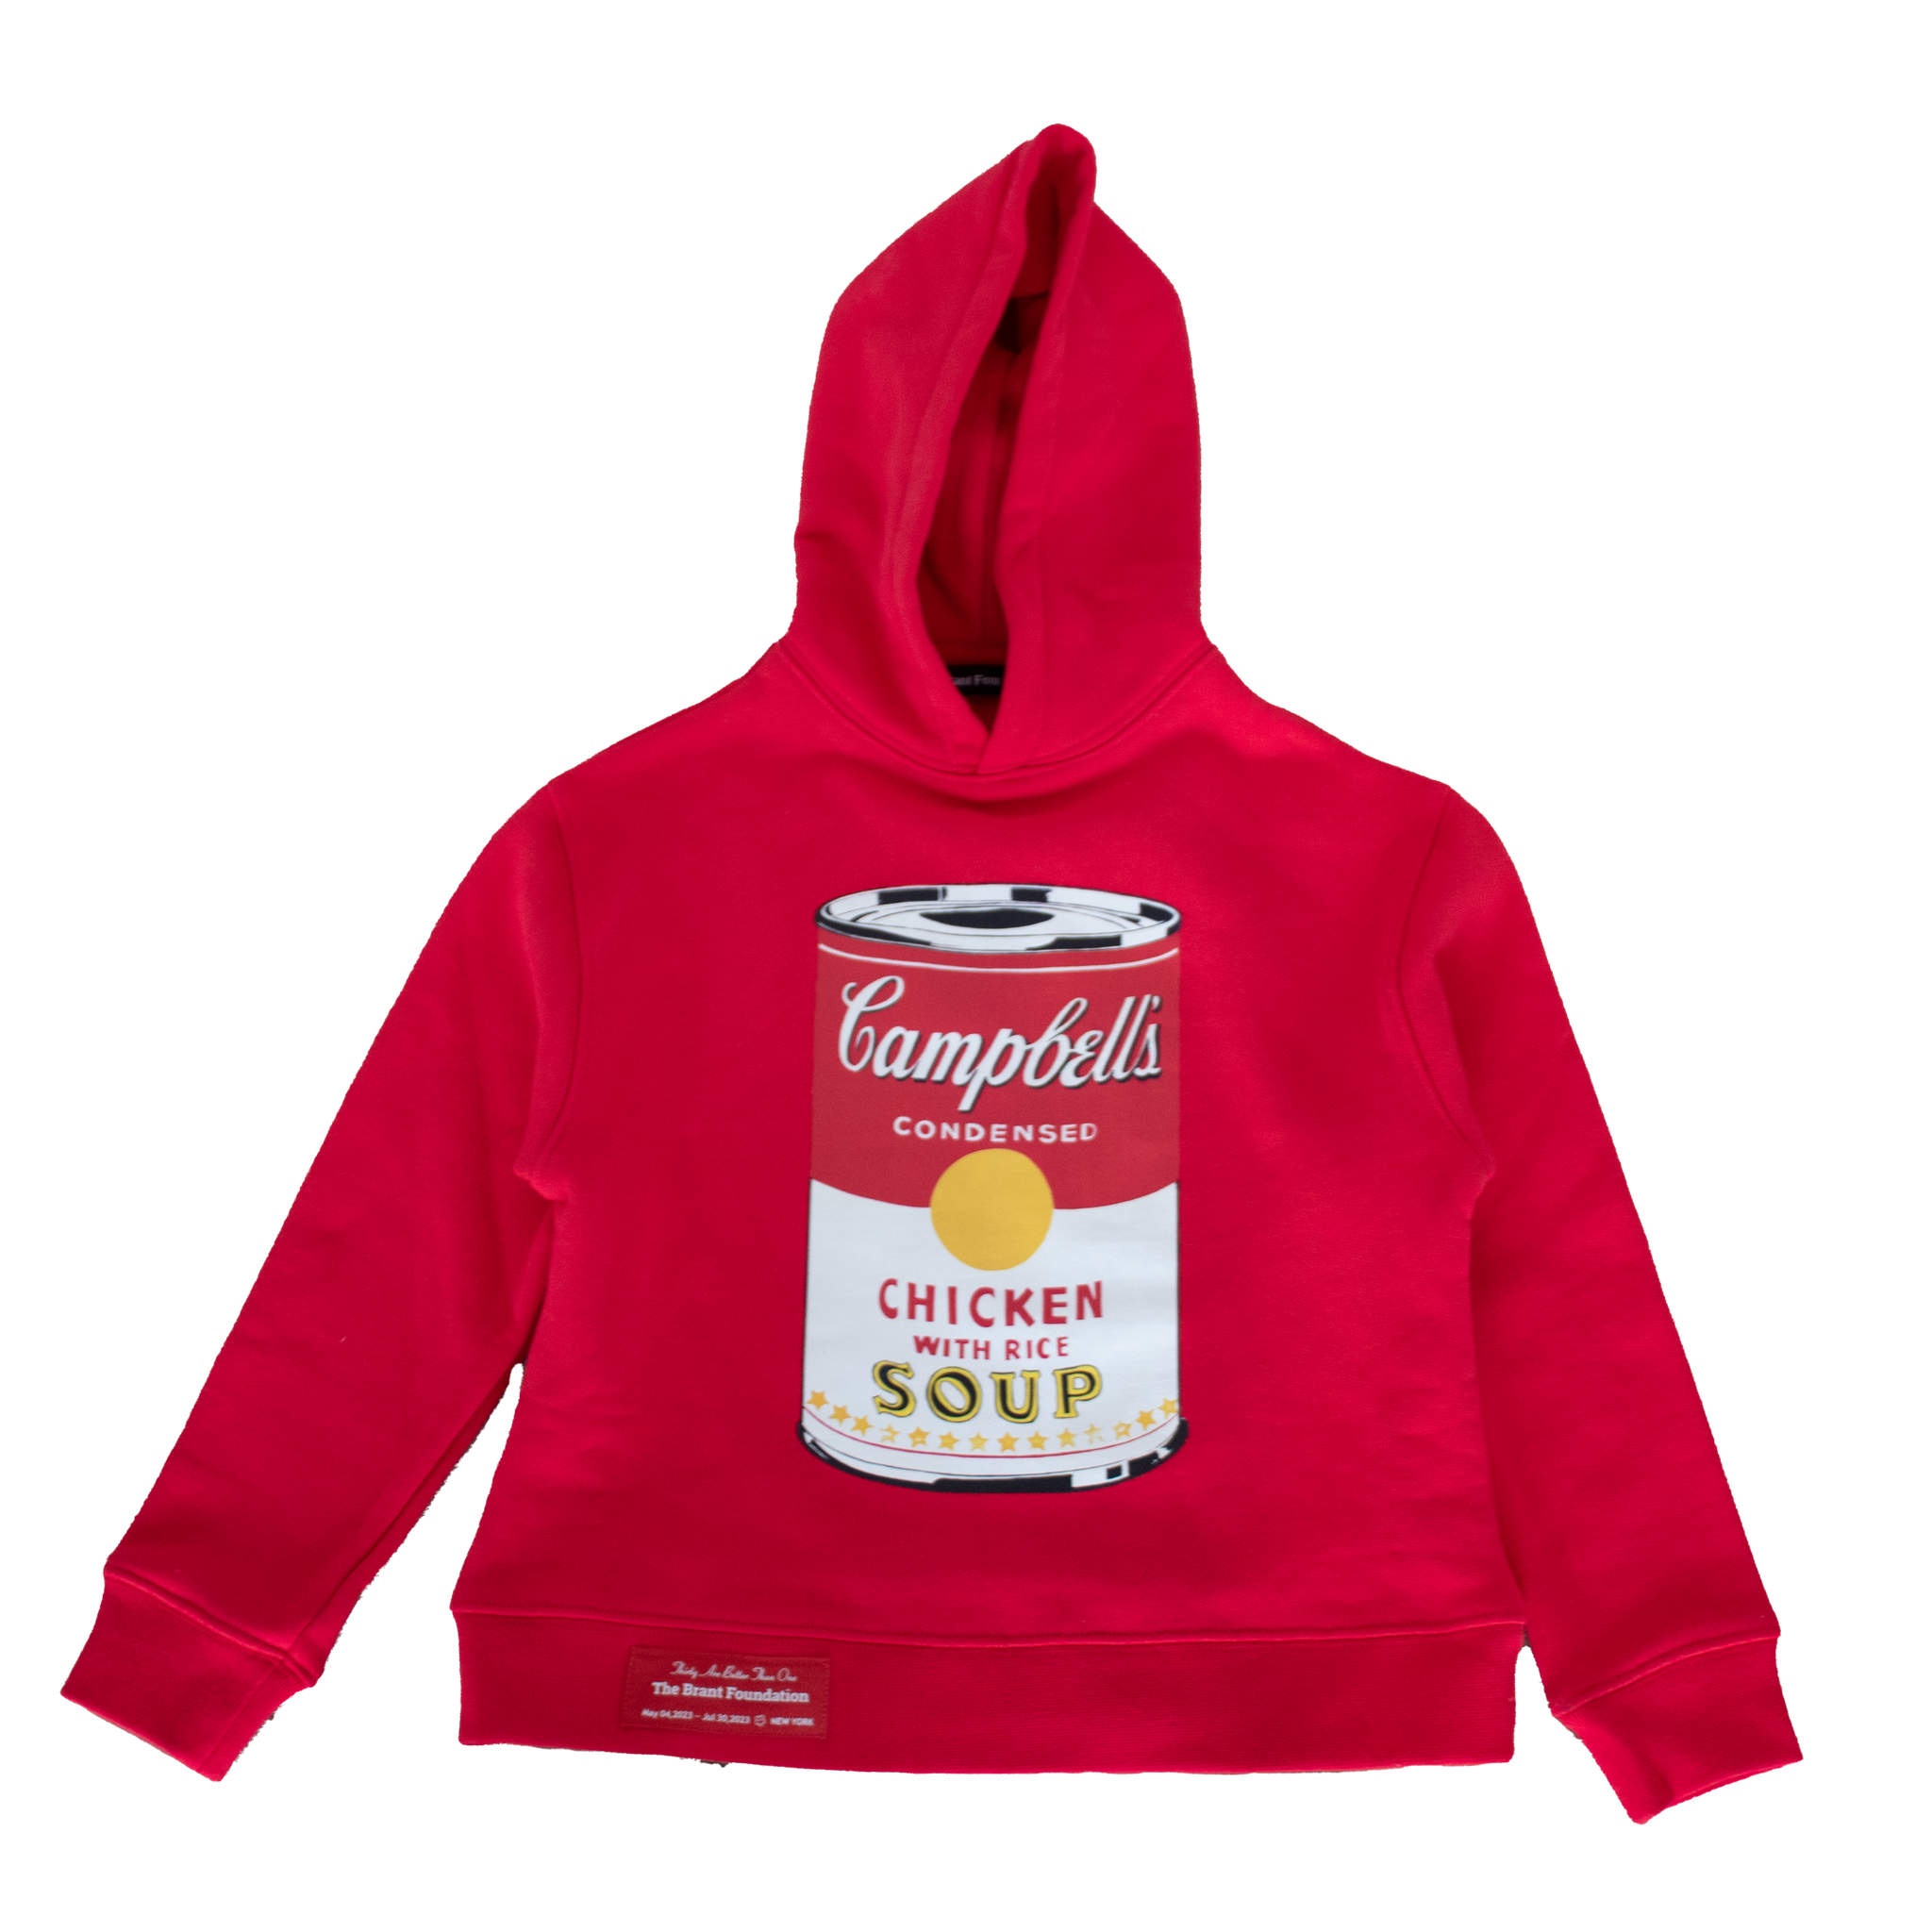 Andy Warhol "Campbell's Soup Can" Youth Hoodie